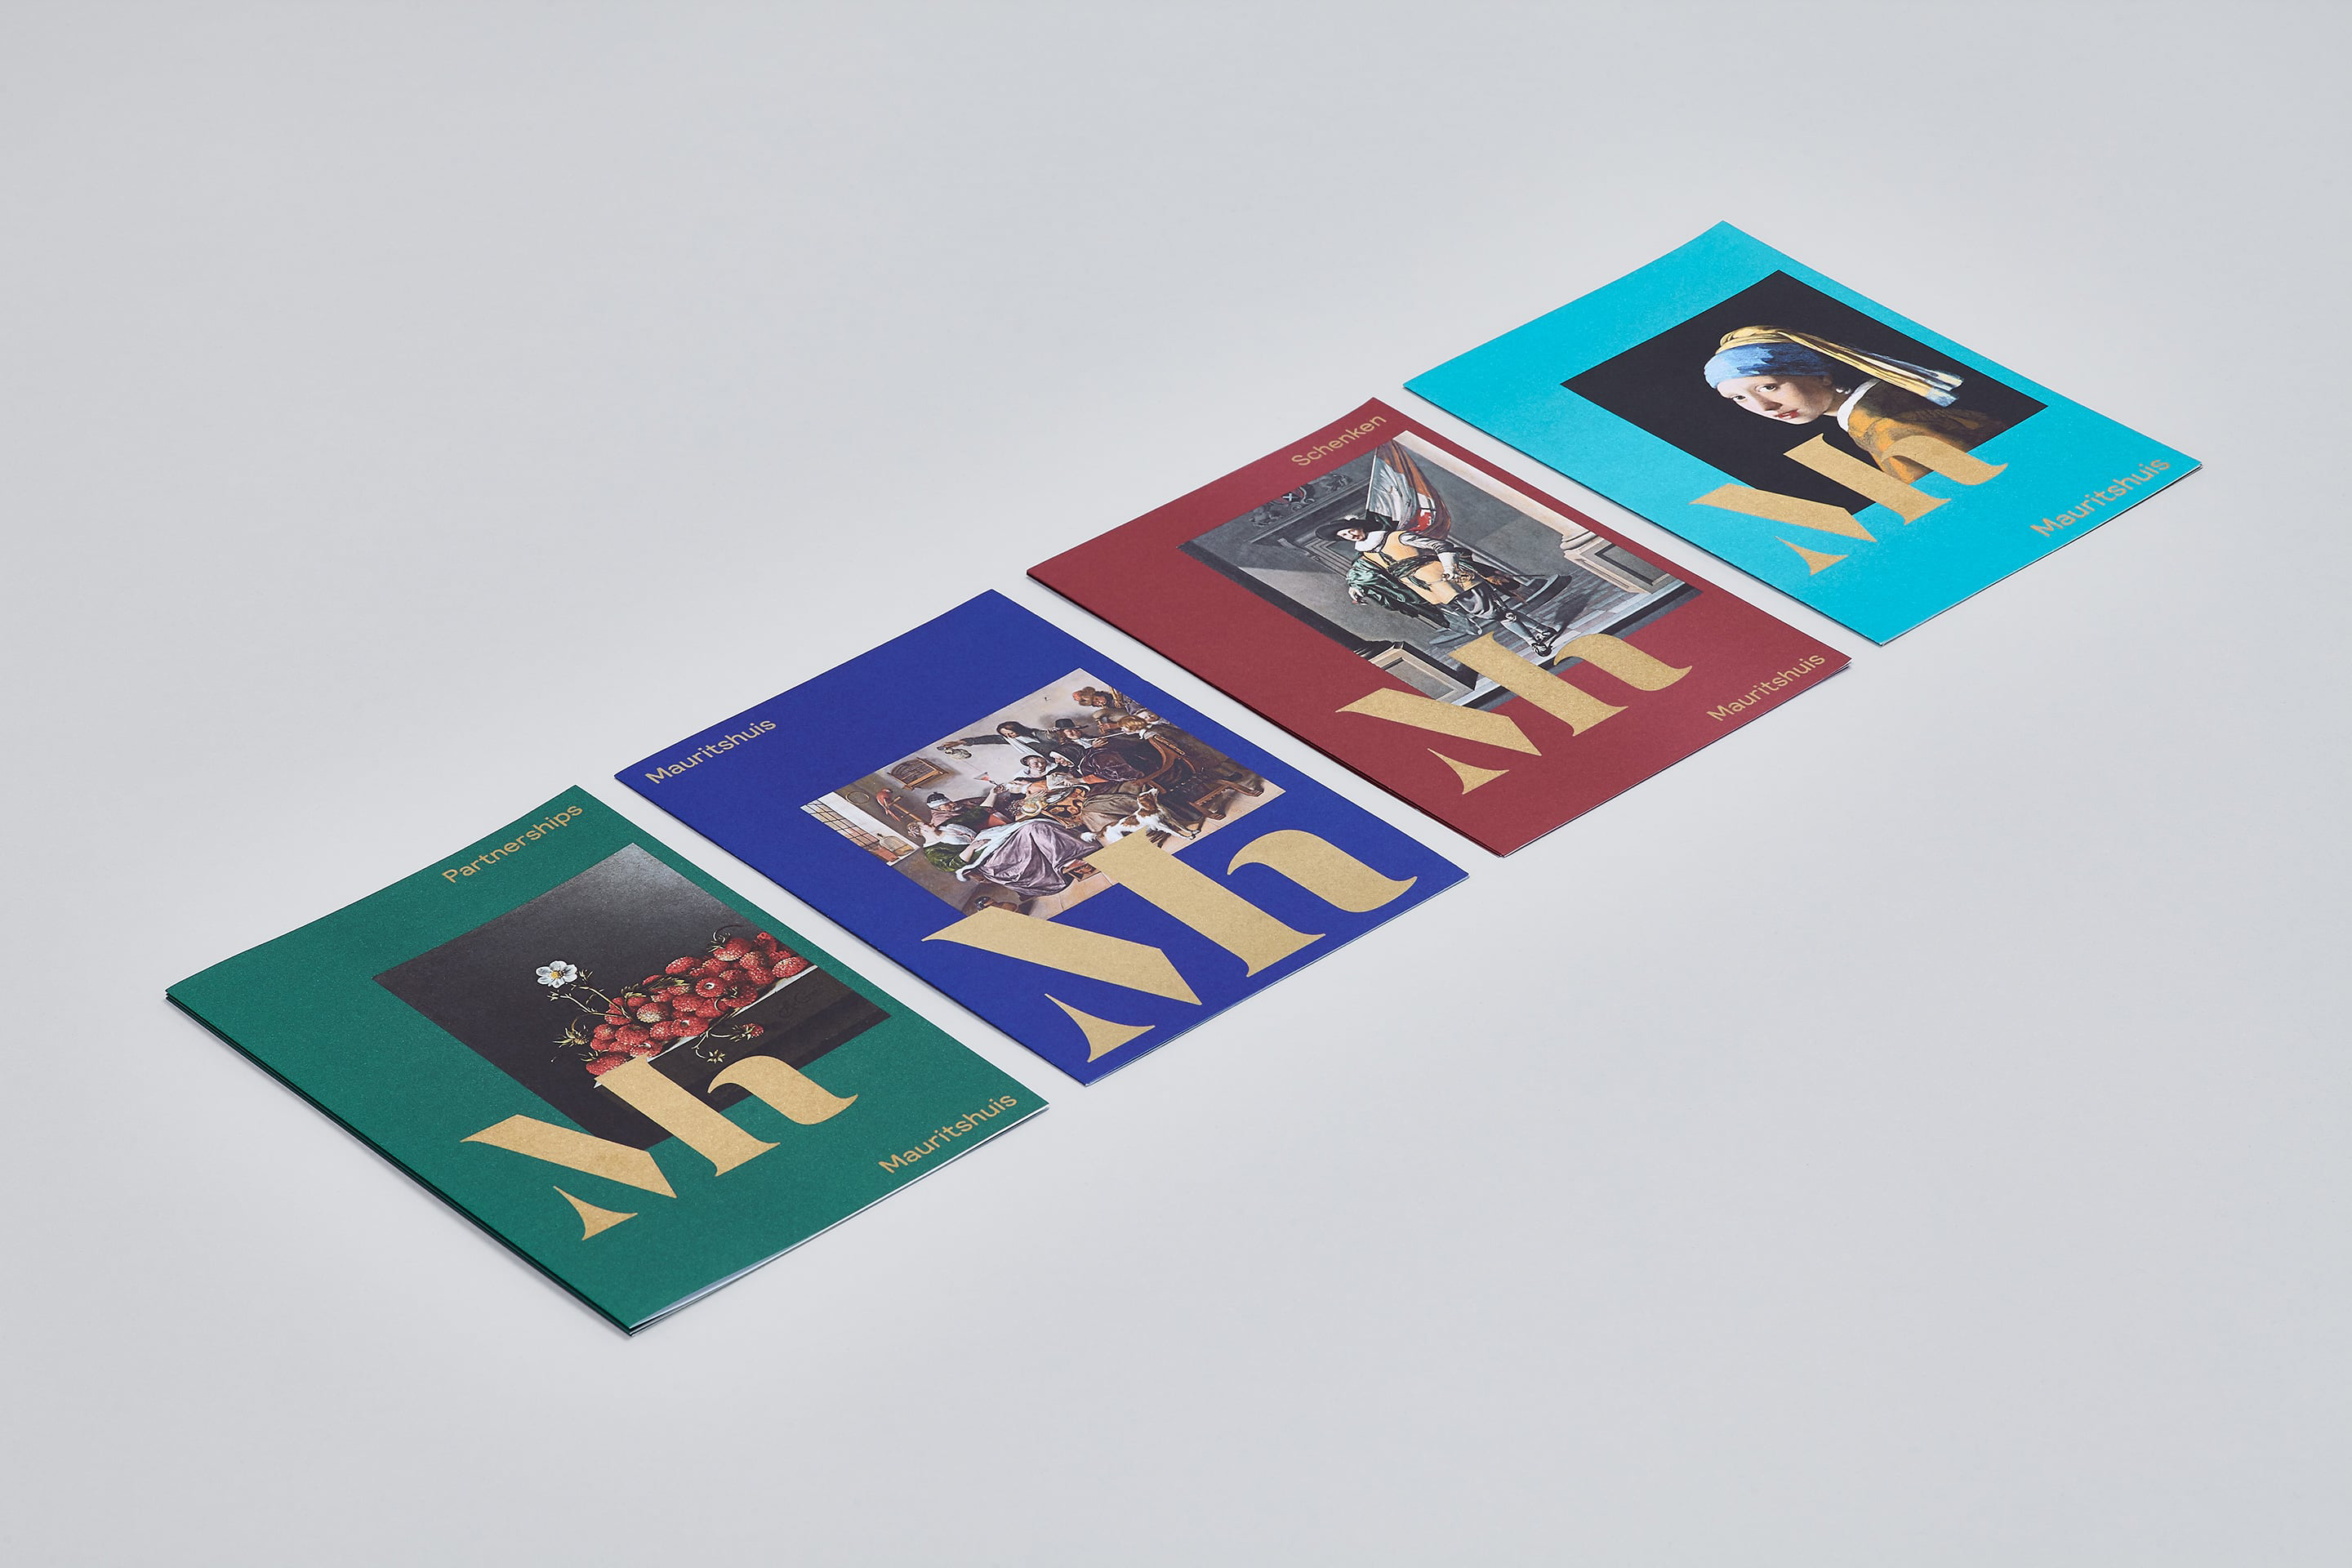 Print and brand identity designed by Dumbar for Mauritshuis